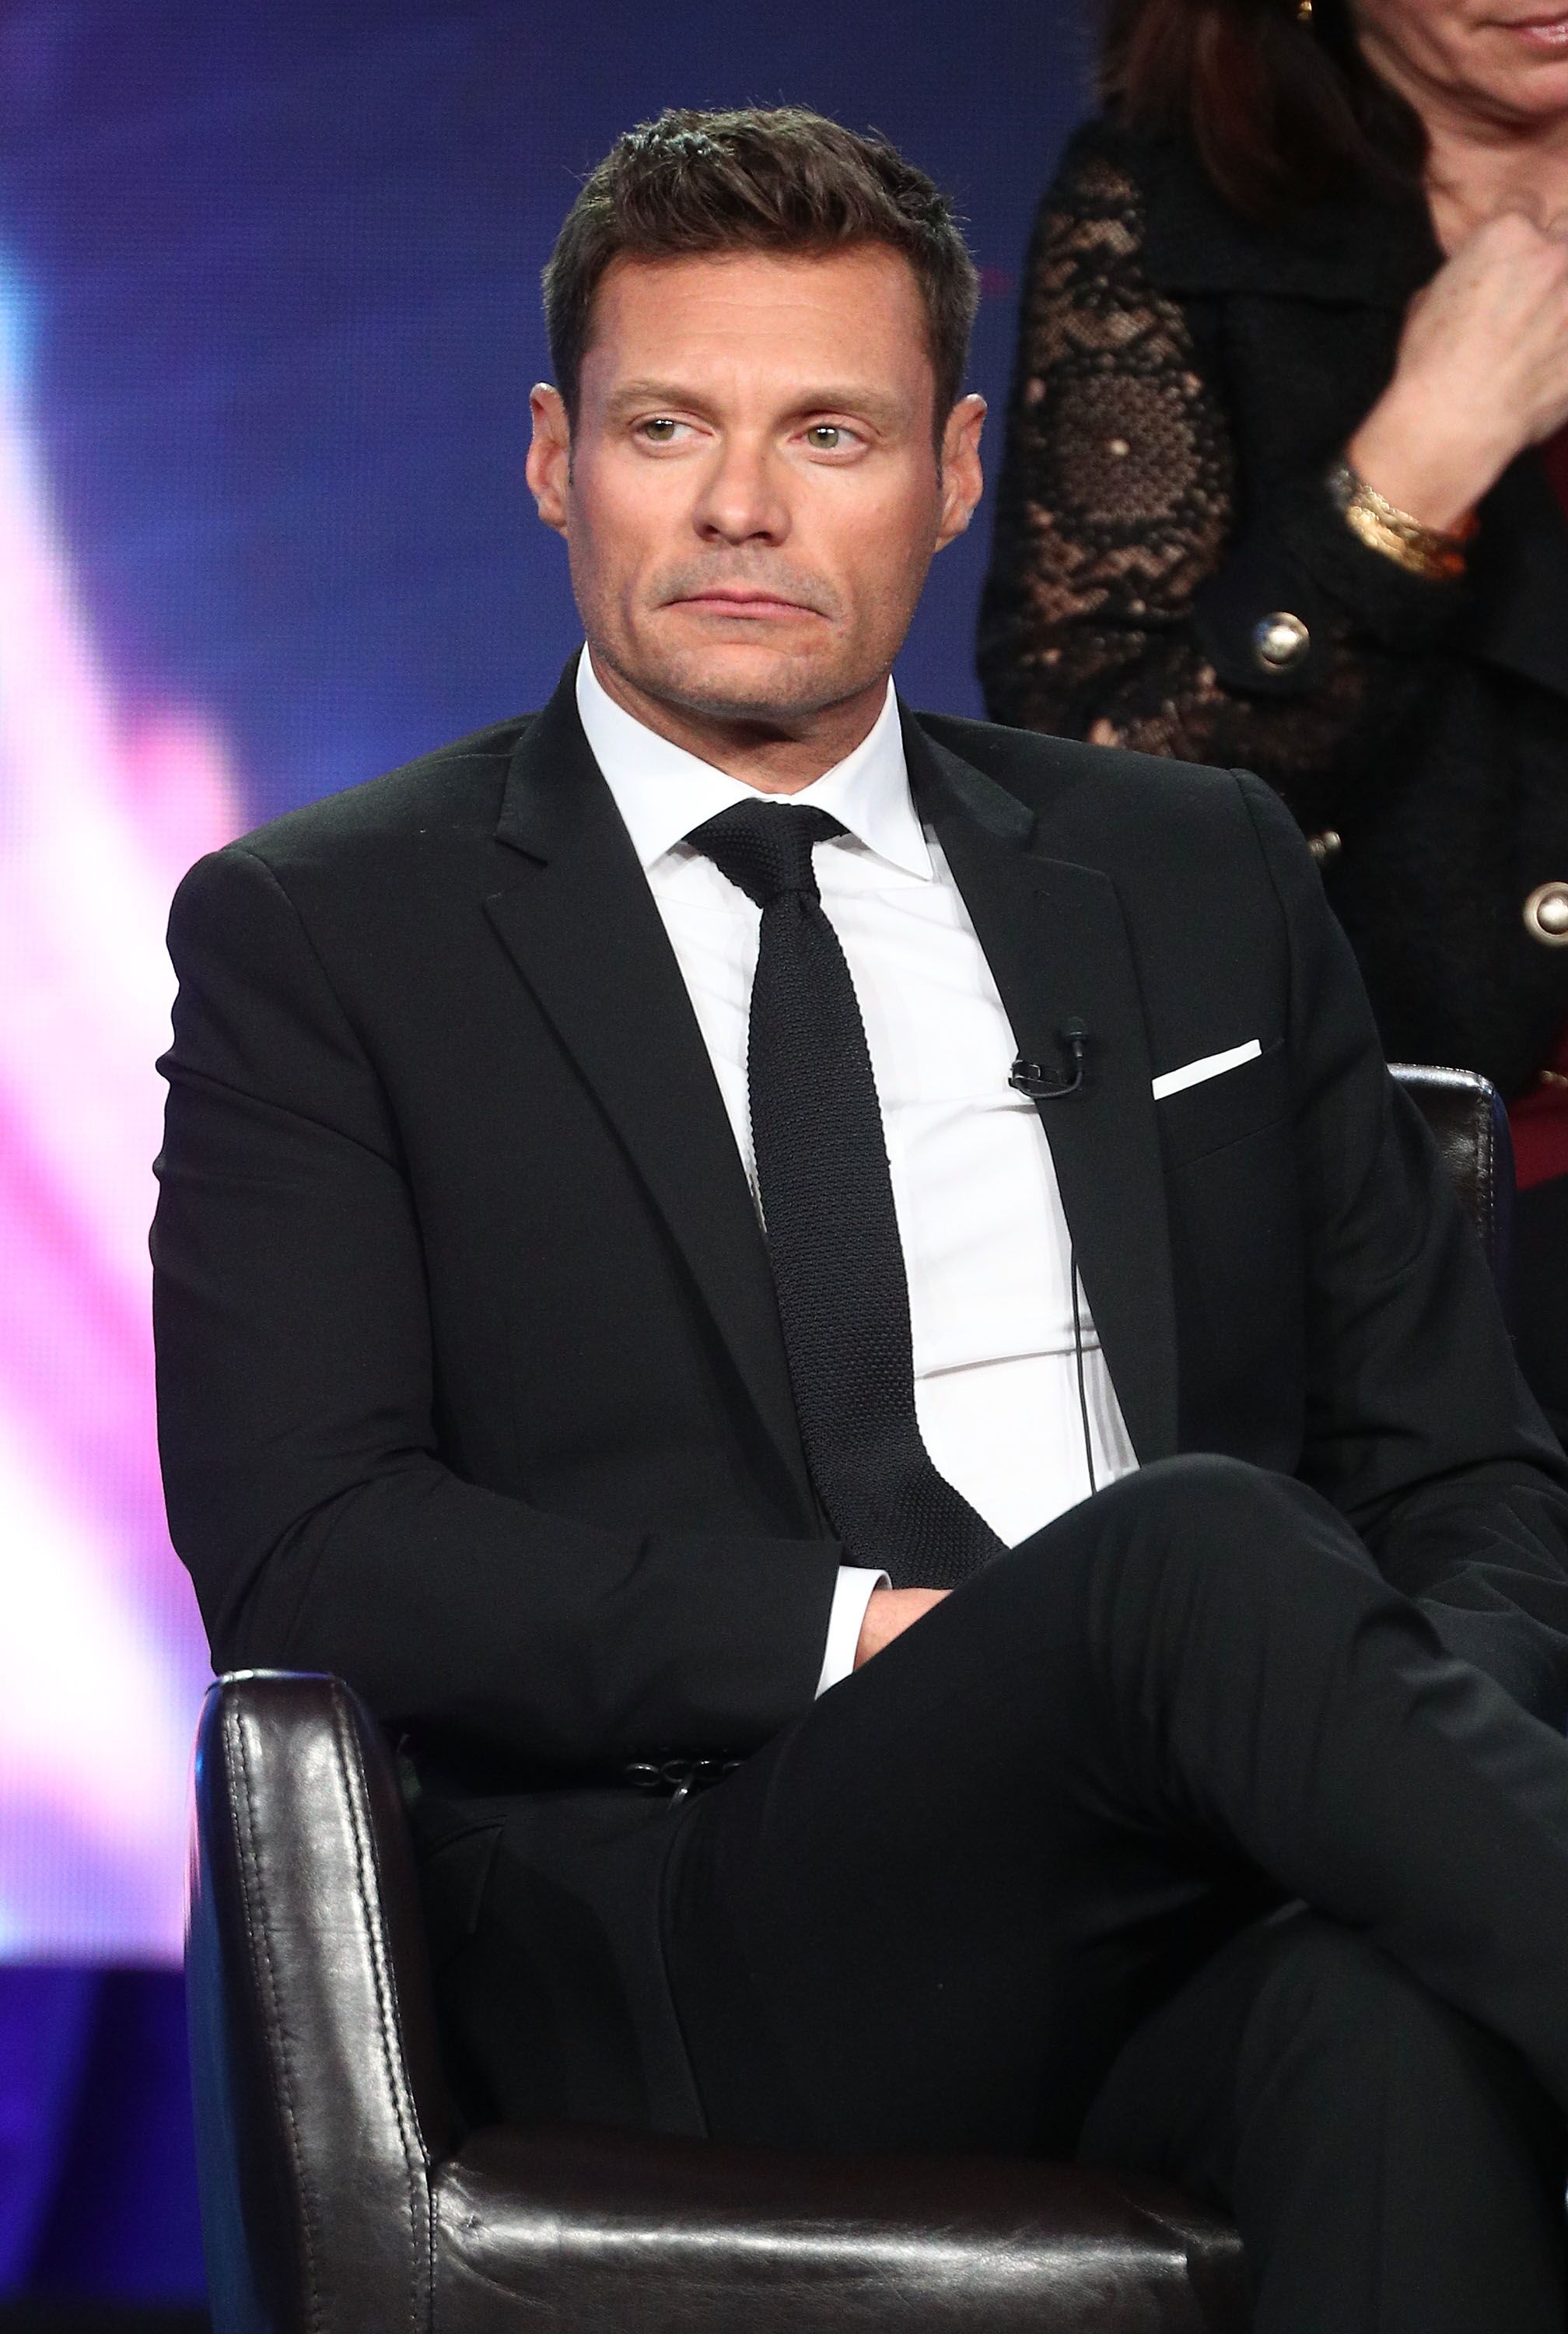 Ryan Seacrest of the television show American Idol speaks onstage during the ABC Television/Disney portion of the 2018 Winter Television Critics Association Press Tour | Getty Images